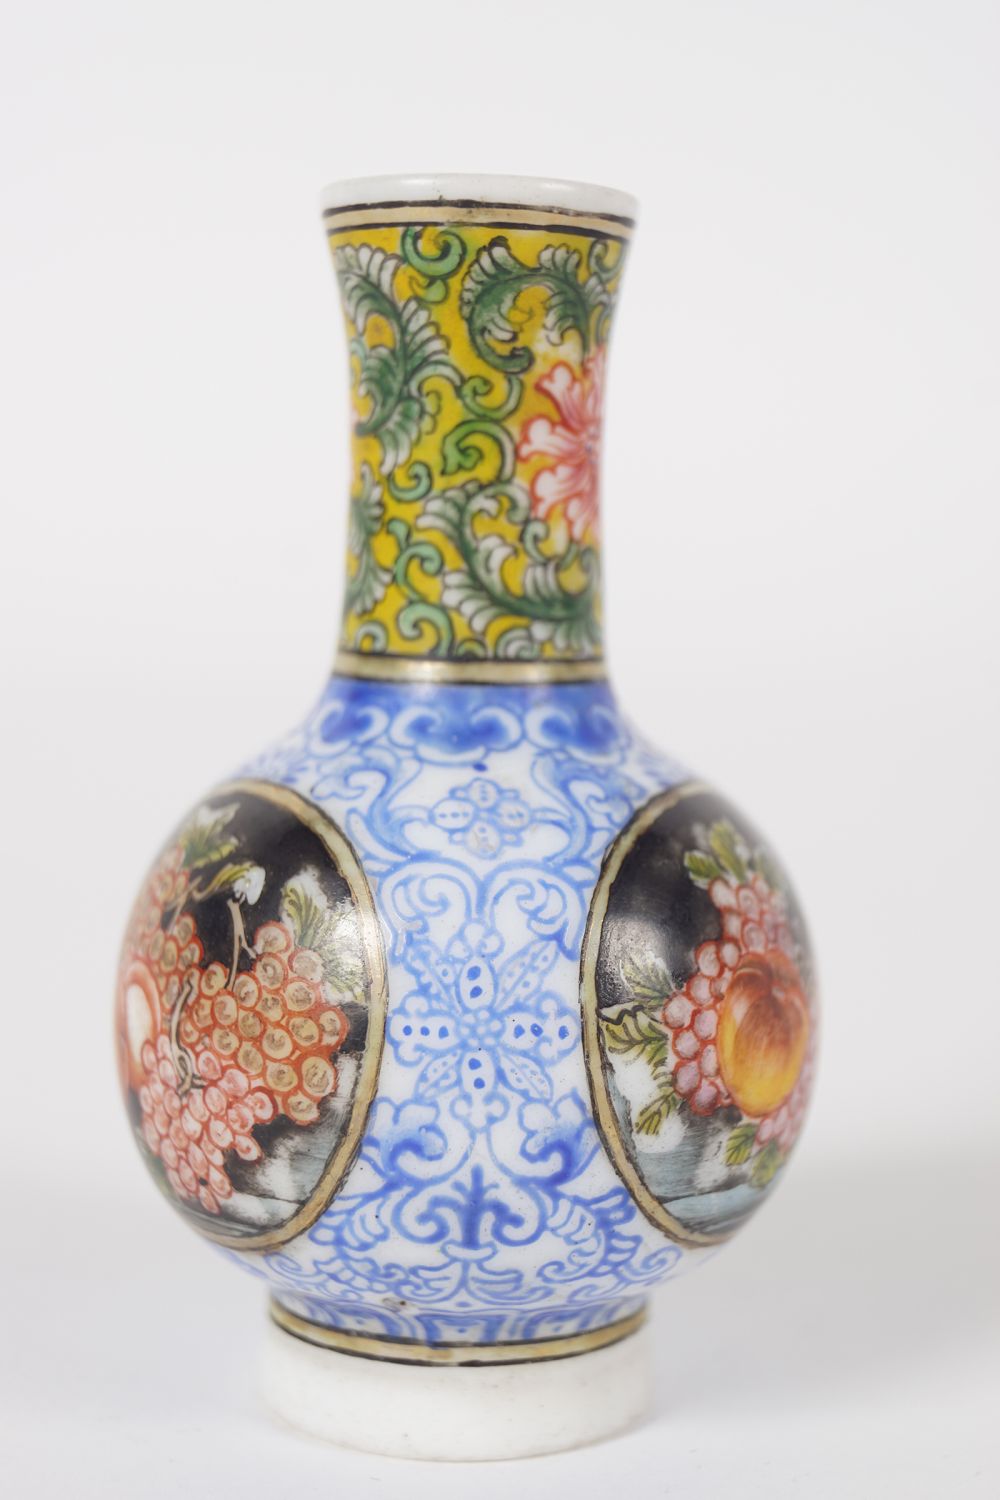 CHINESE QING POLYCHROME GLASS VASE - Image 2 of 5